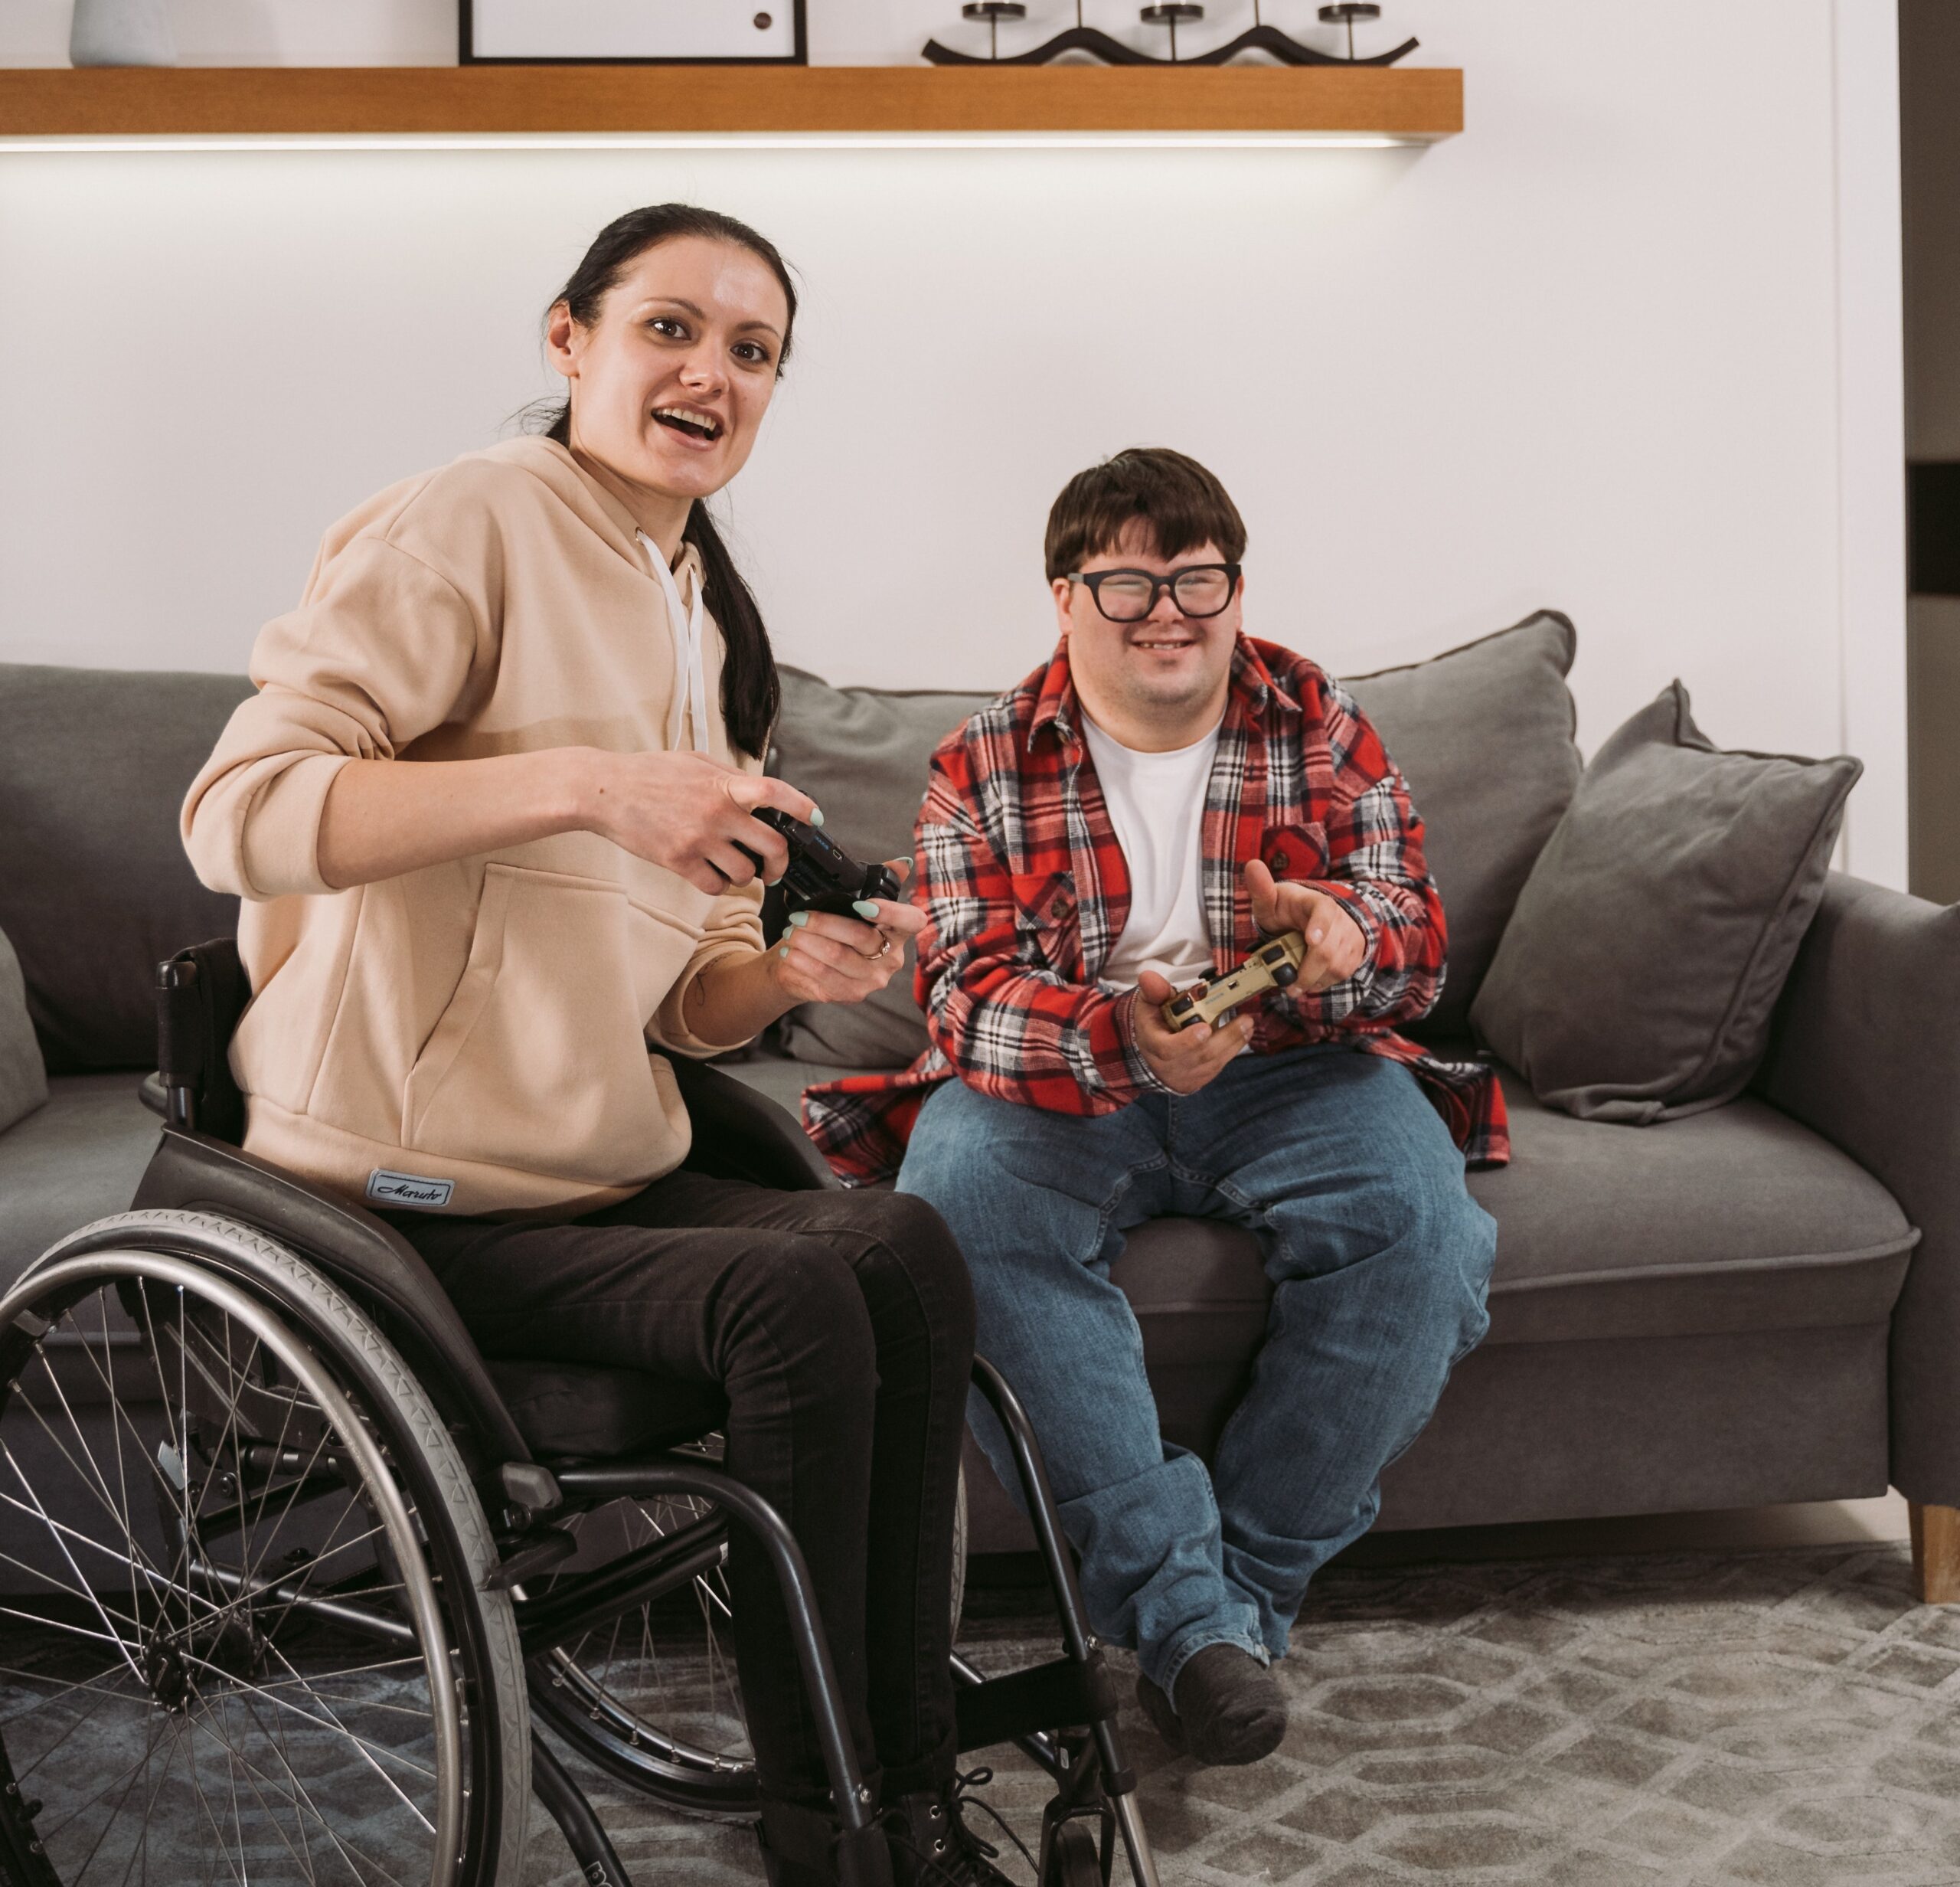 women in wheelchair and man on couch play videogames.